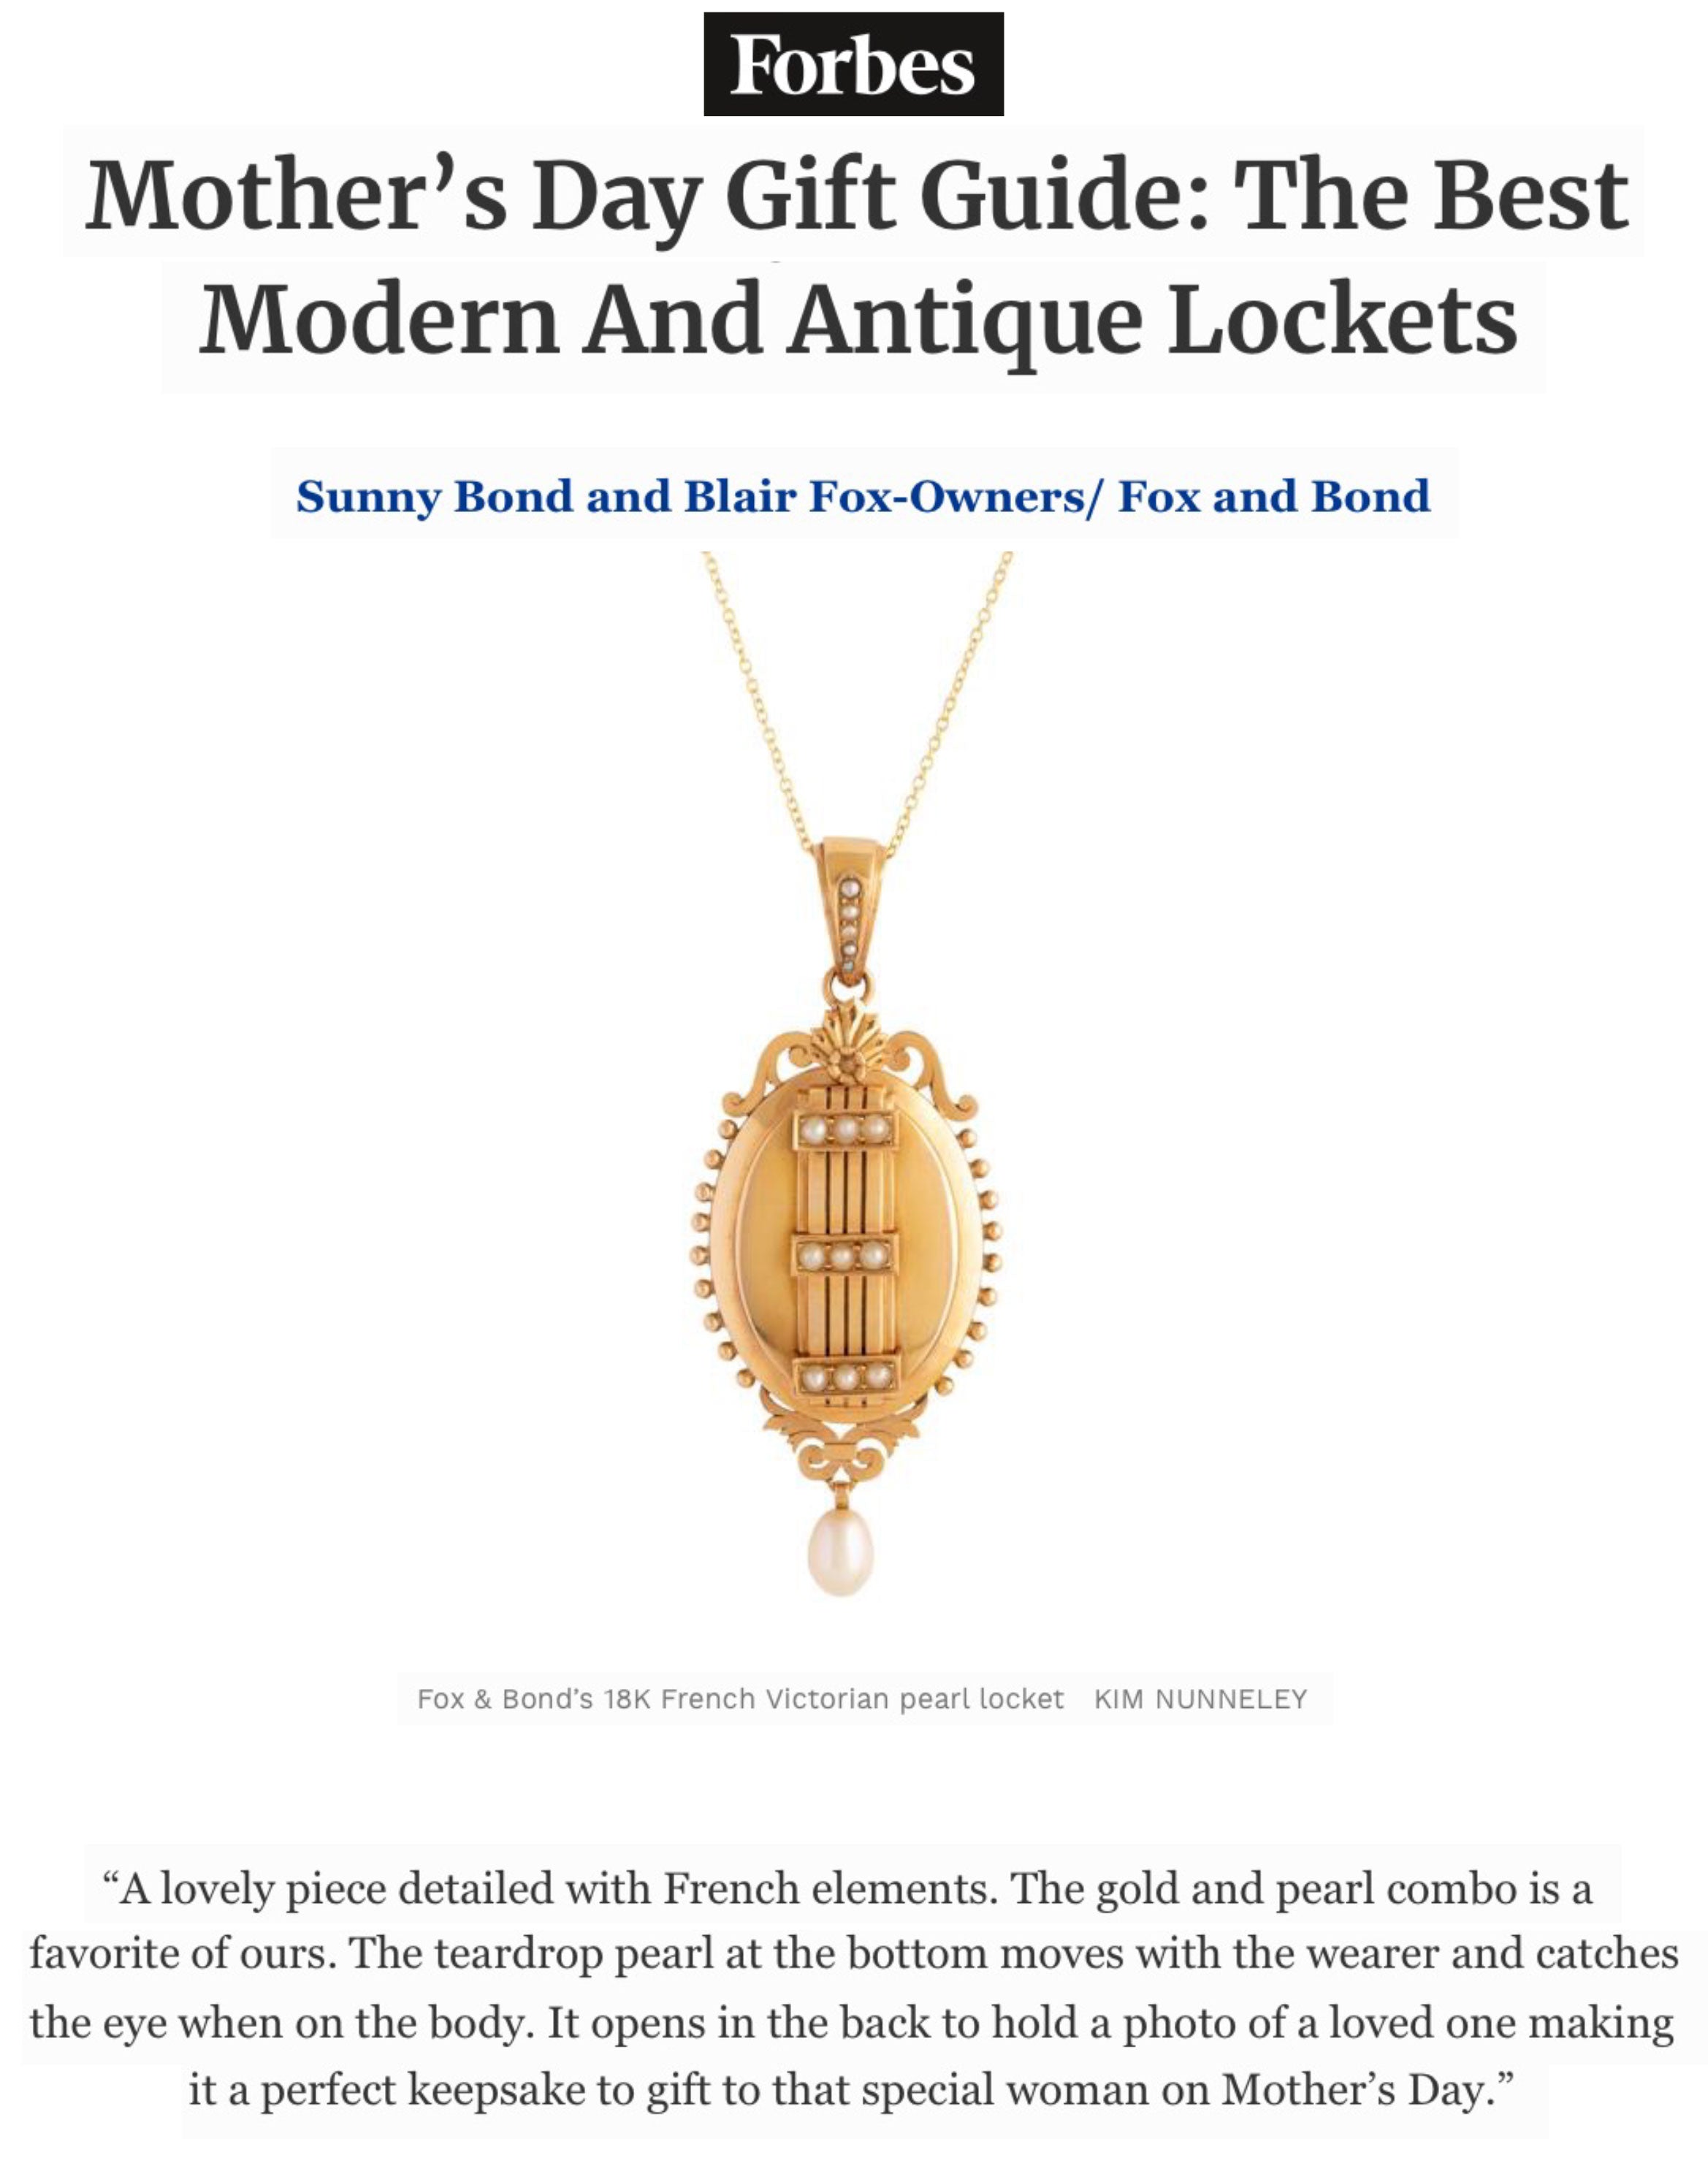 Forbes: Mother’s Day Gift Guide: The Best Modern And Antique Lockets